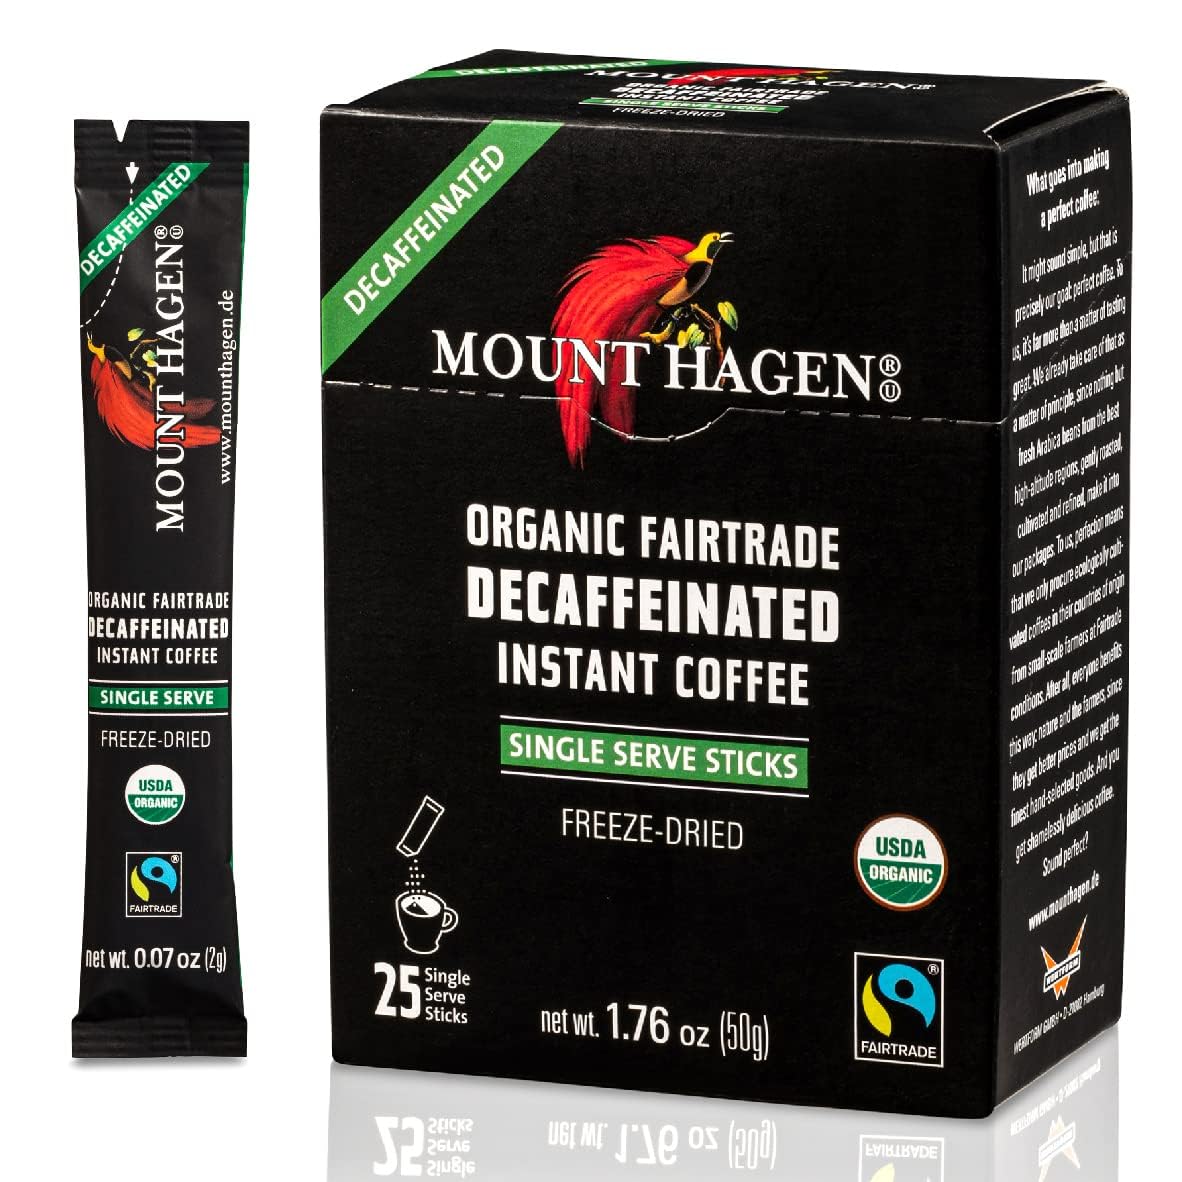 Mount Hagen 25 Count Single Serve Instant Decaf Coffee Packets | Eco-friendly Decaf Instant Coffee Pouches, Medium Roast Arabica Beans | Organic, Fair-Trade Decaffeinated Coffee